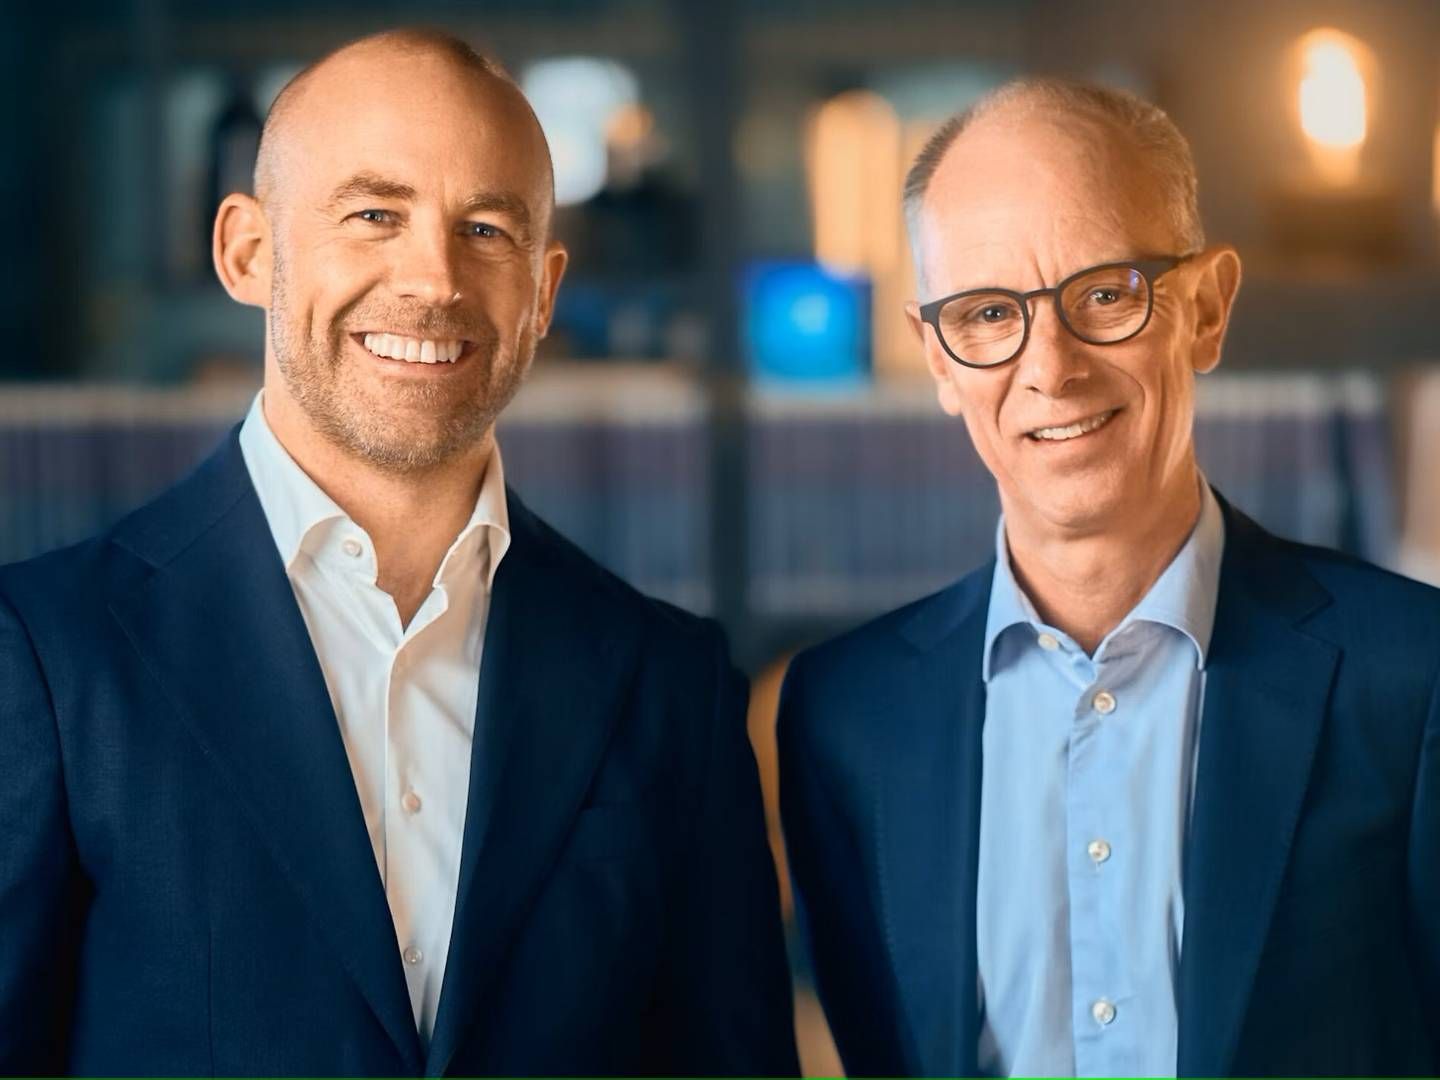 Johan Malm (left) and Johan Lannebo are the driving forces behind the merger. | Photo: PR / Öhman and Lannebo